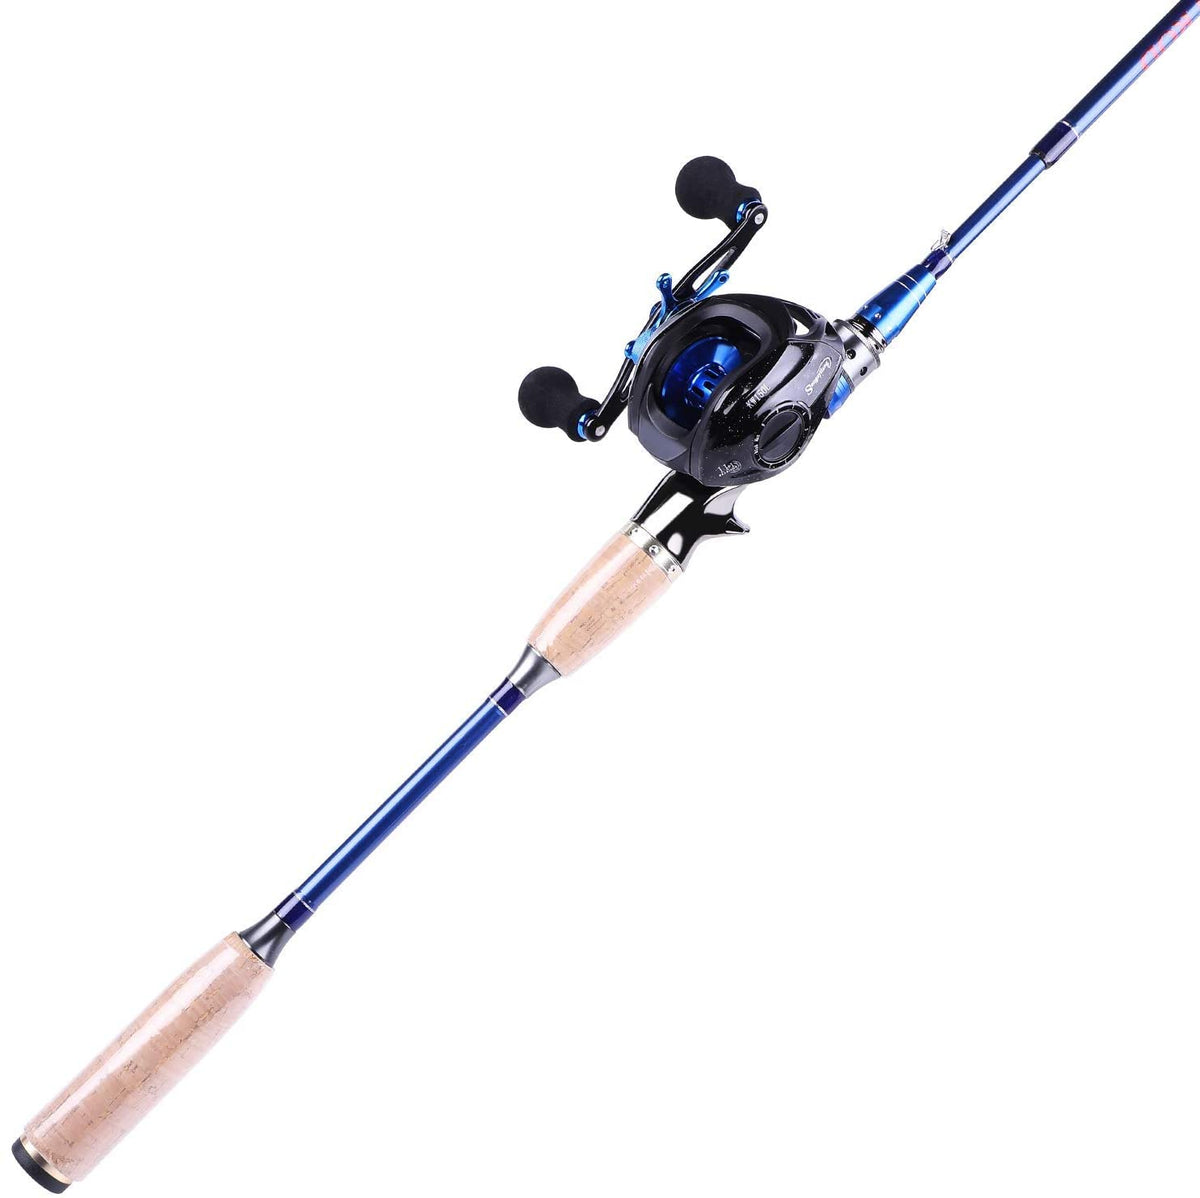 Sougayilang 7ft Casting Rod and Reel Combo 4 Piece Fishing Pole with 18+1  BB Baitcaster Reel Setup 